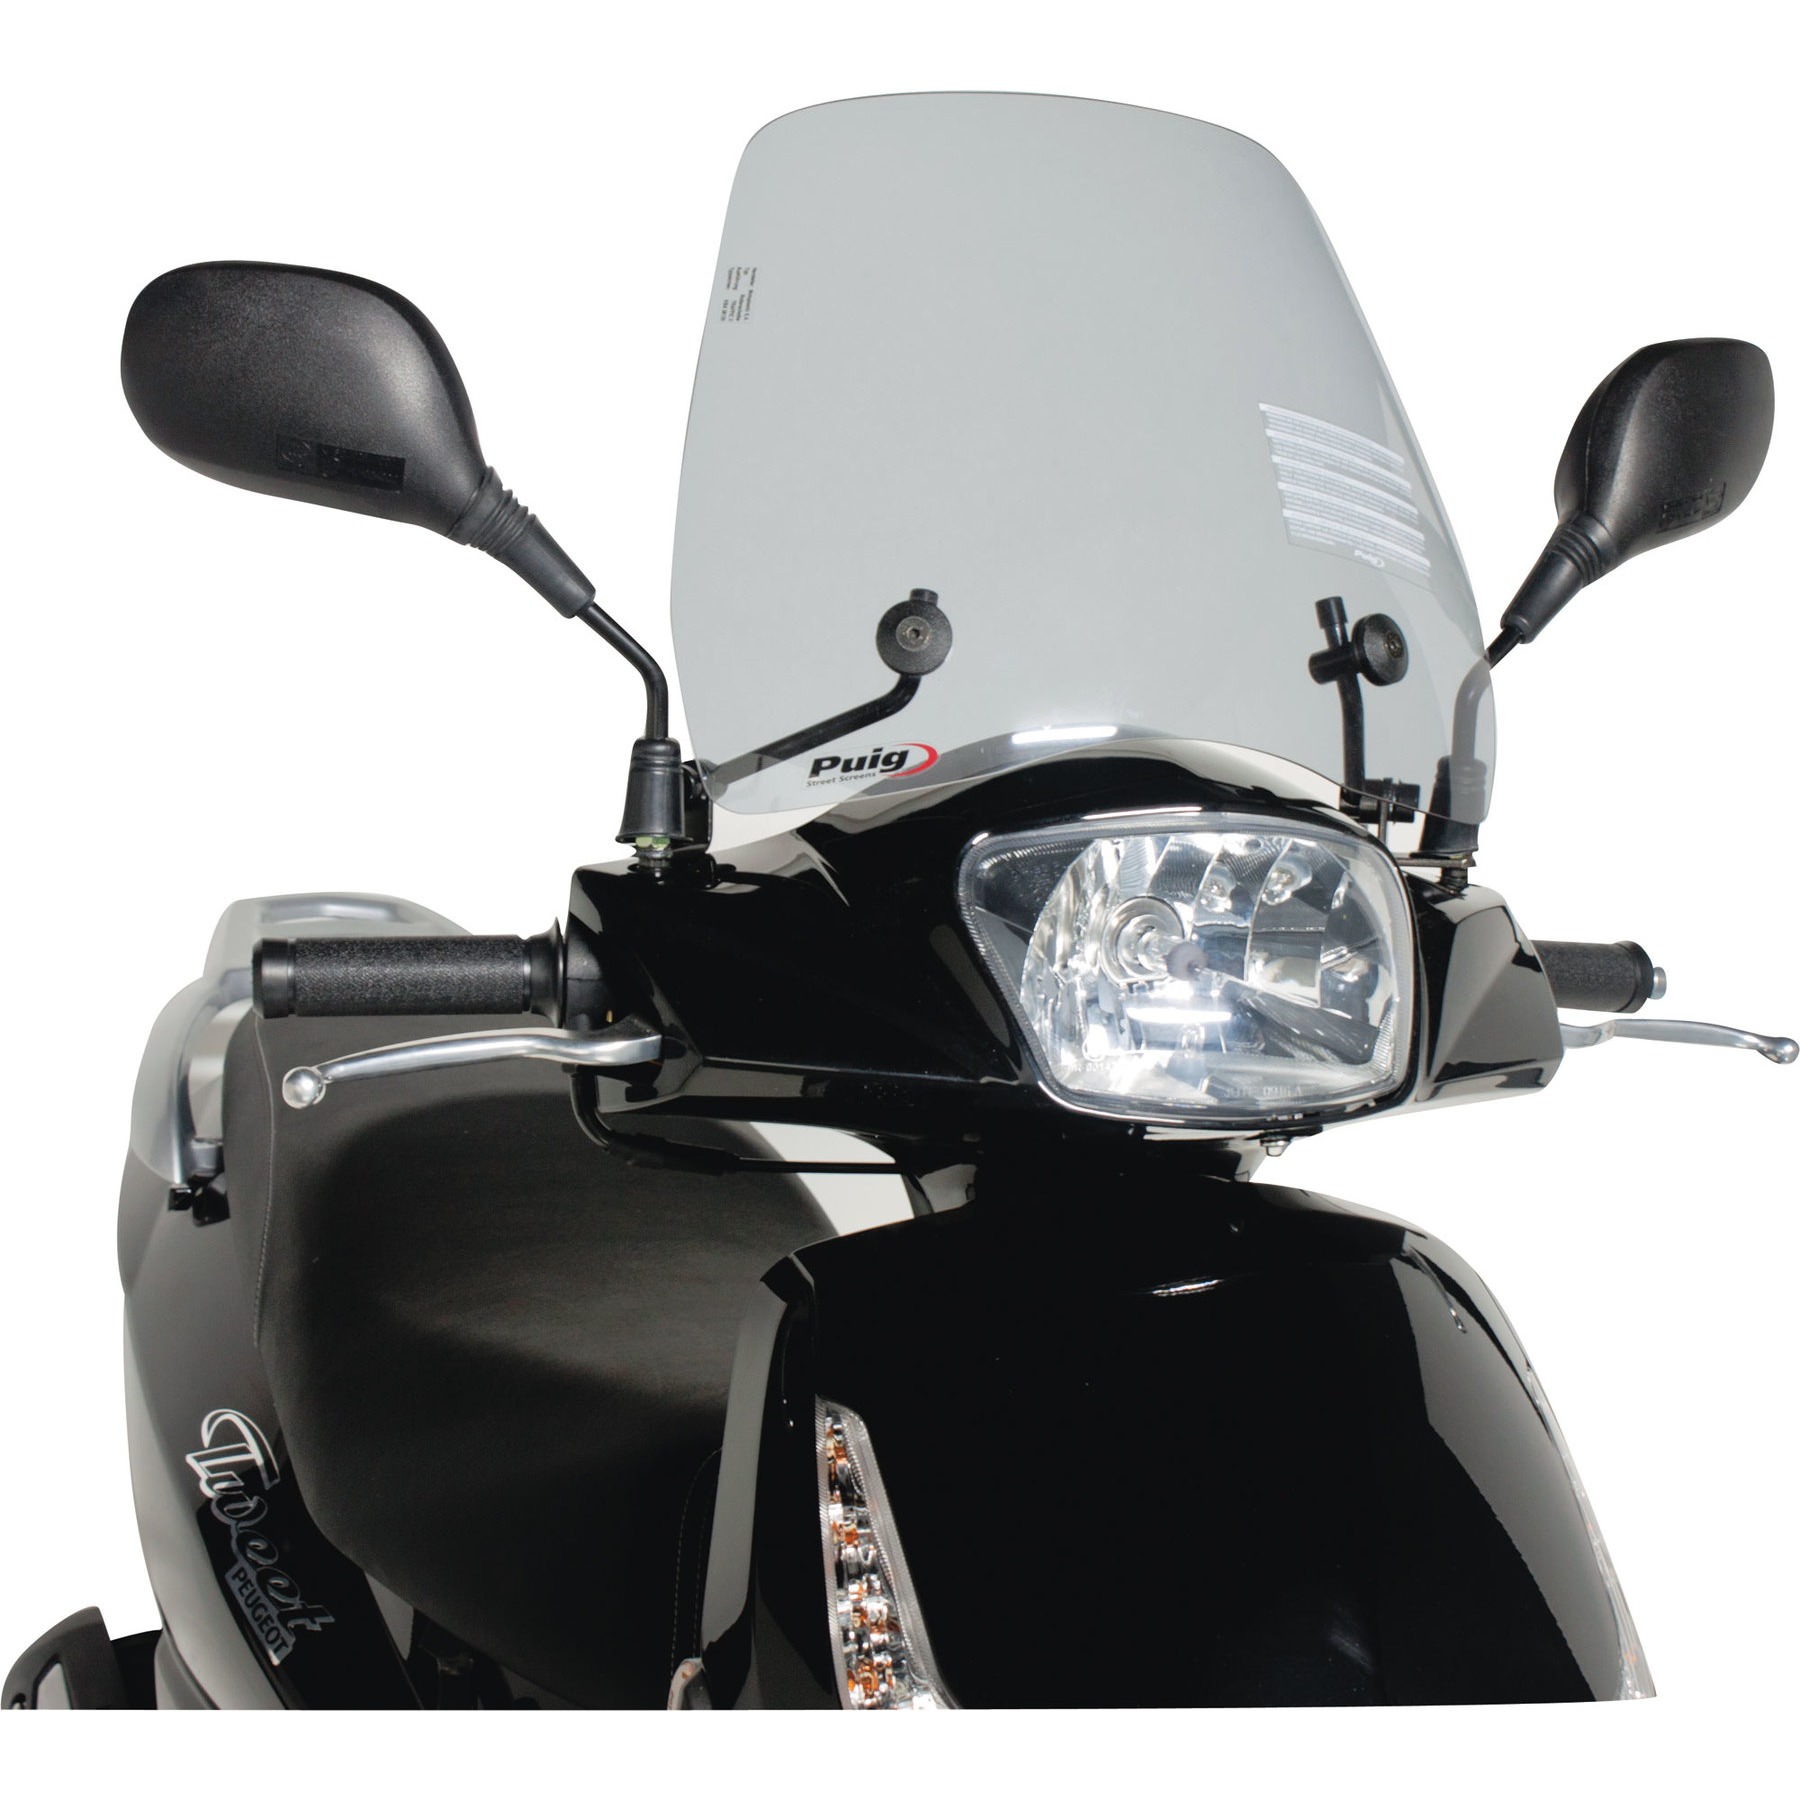 White Mirrors w/built in blinkers set for Moped Scooters 8mm thread